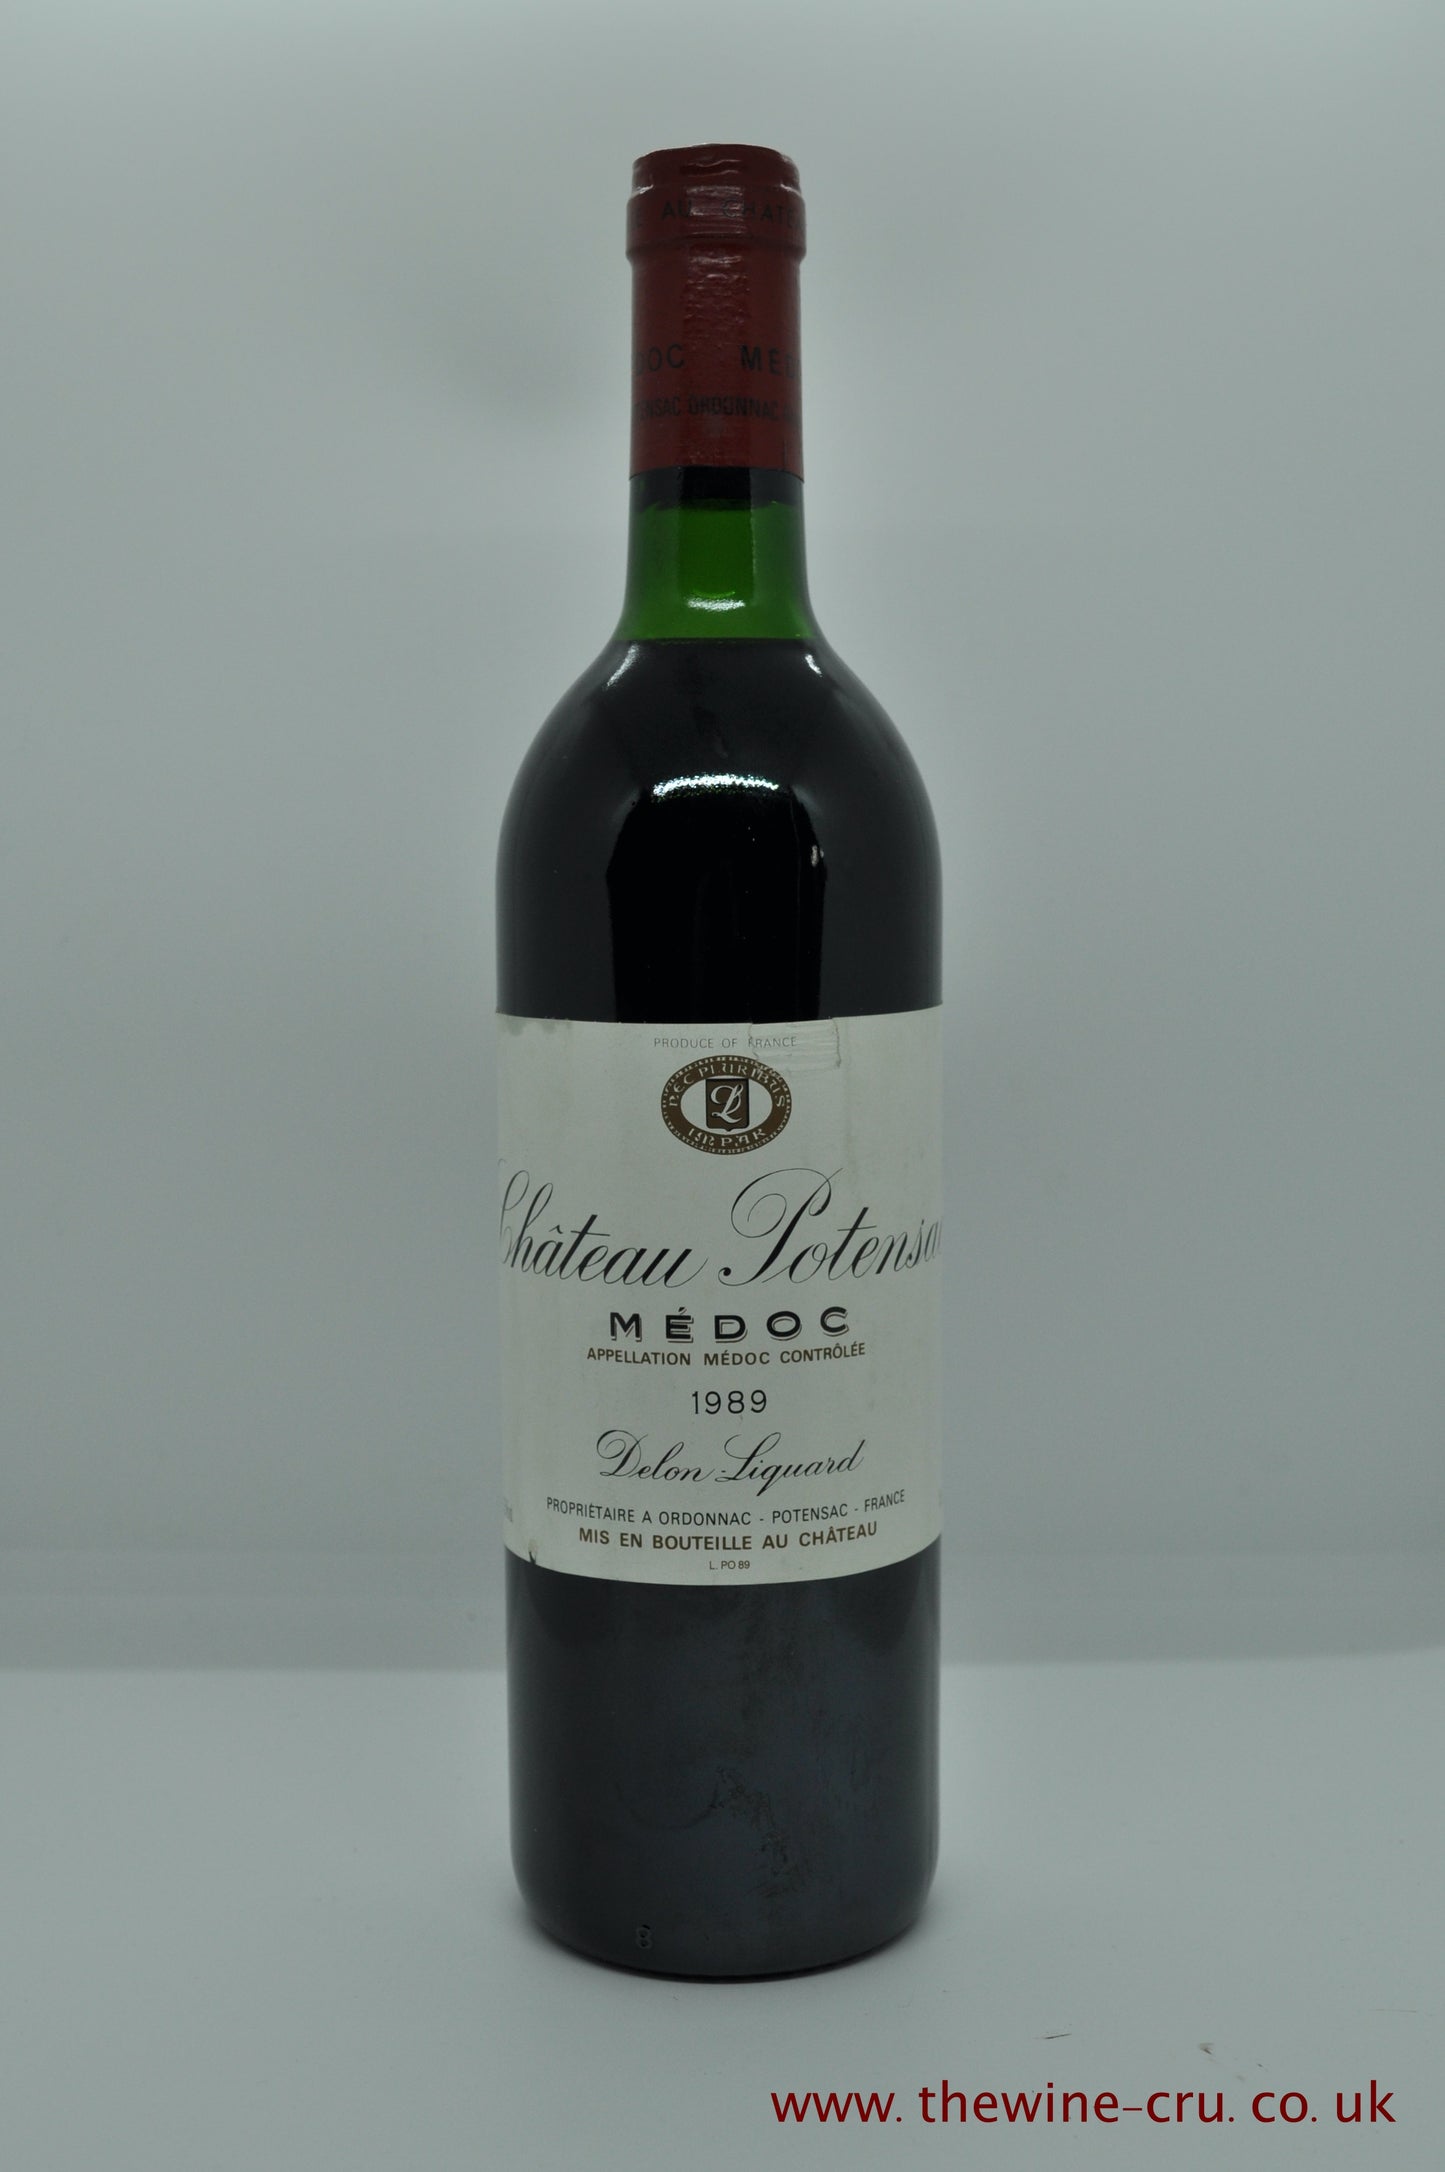 1989 vintage red wine. Chateau Potensac 1989 France Bordeaux. Immediate delivery. Free local delivery.